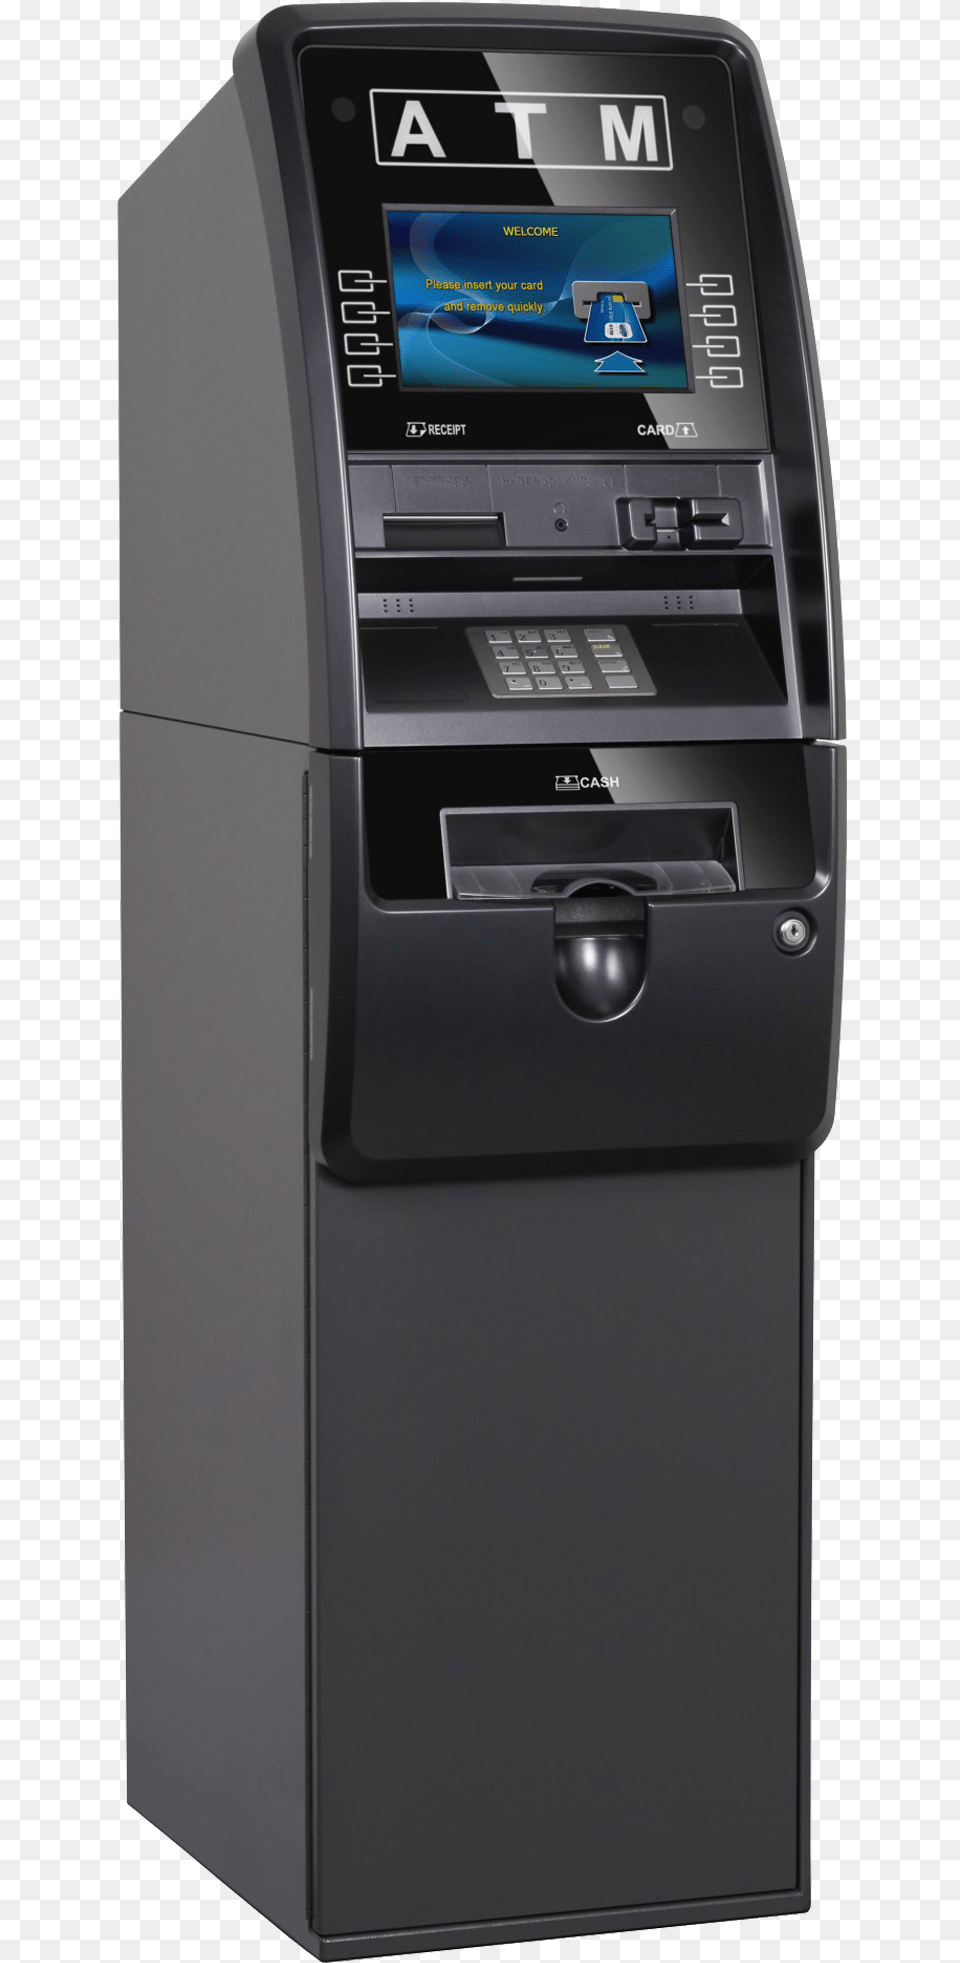 Genmega Onyx Atm From Empire Atm Group Empireatmgroup Genmega Onyx, Machine Png Image